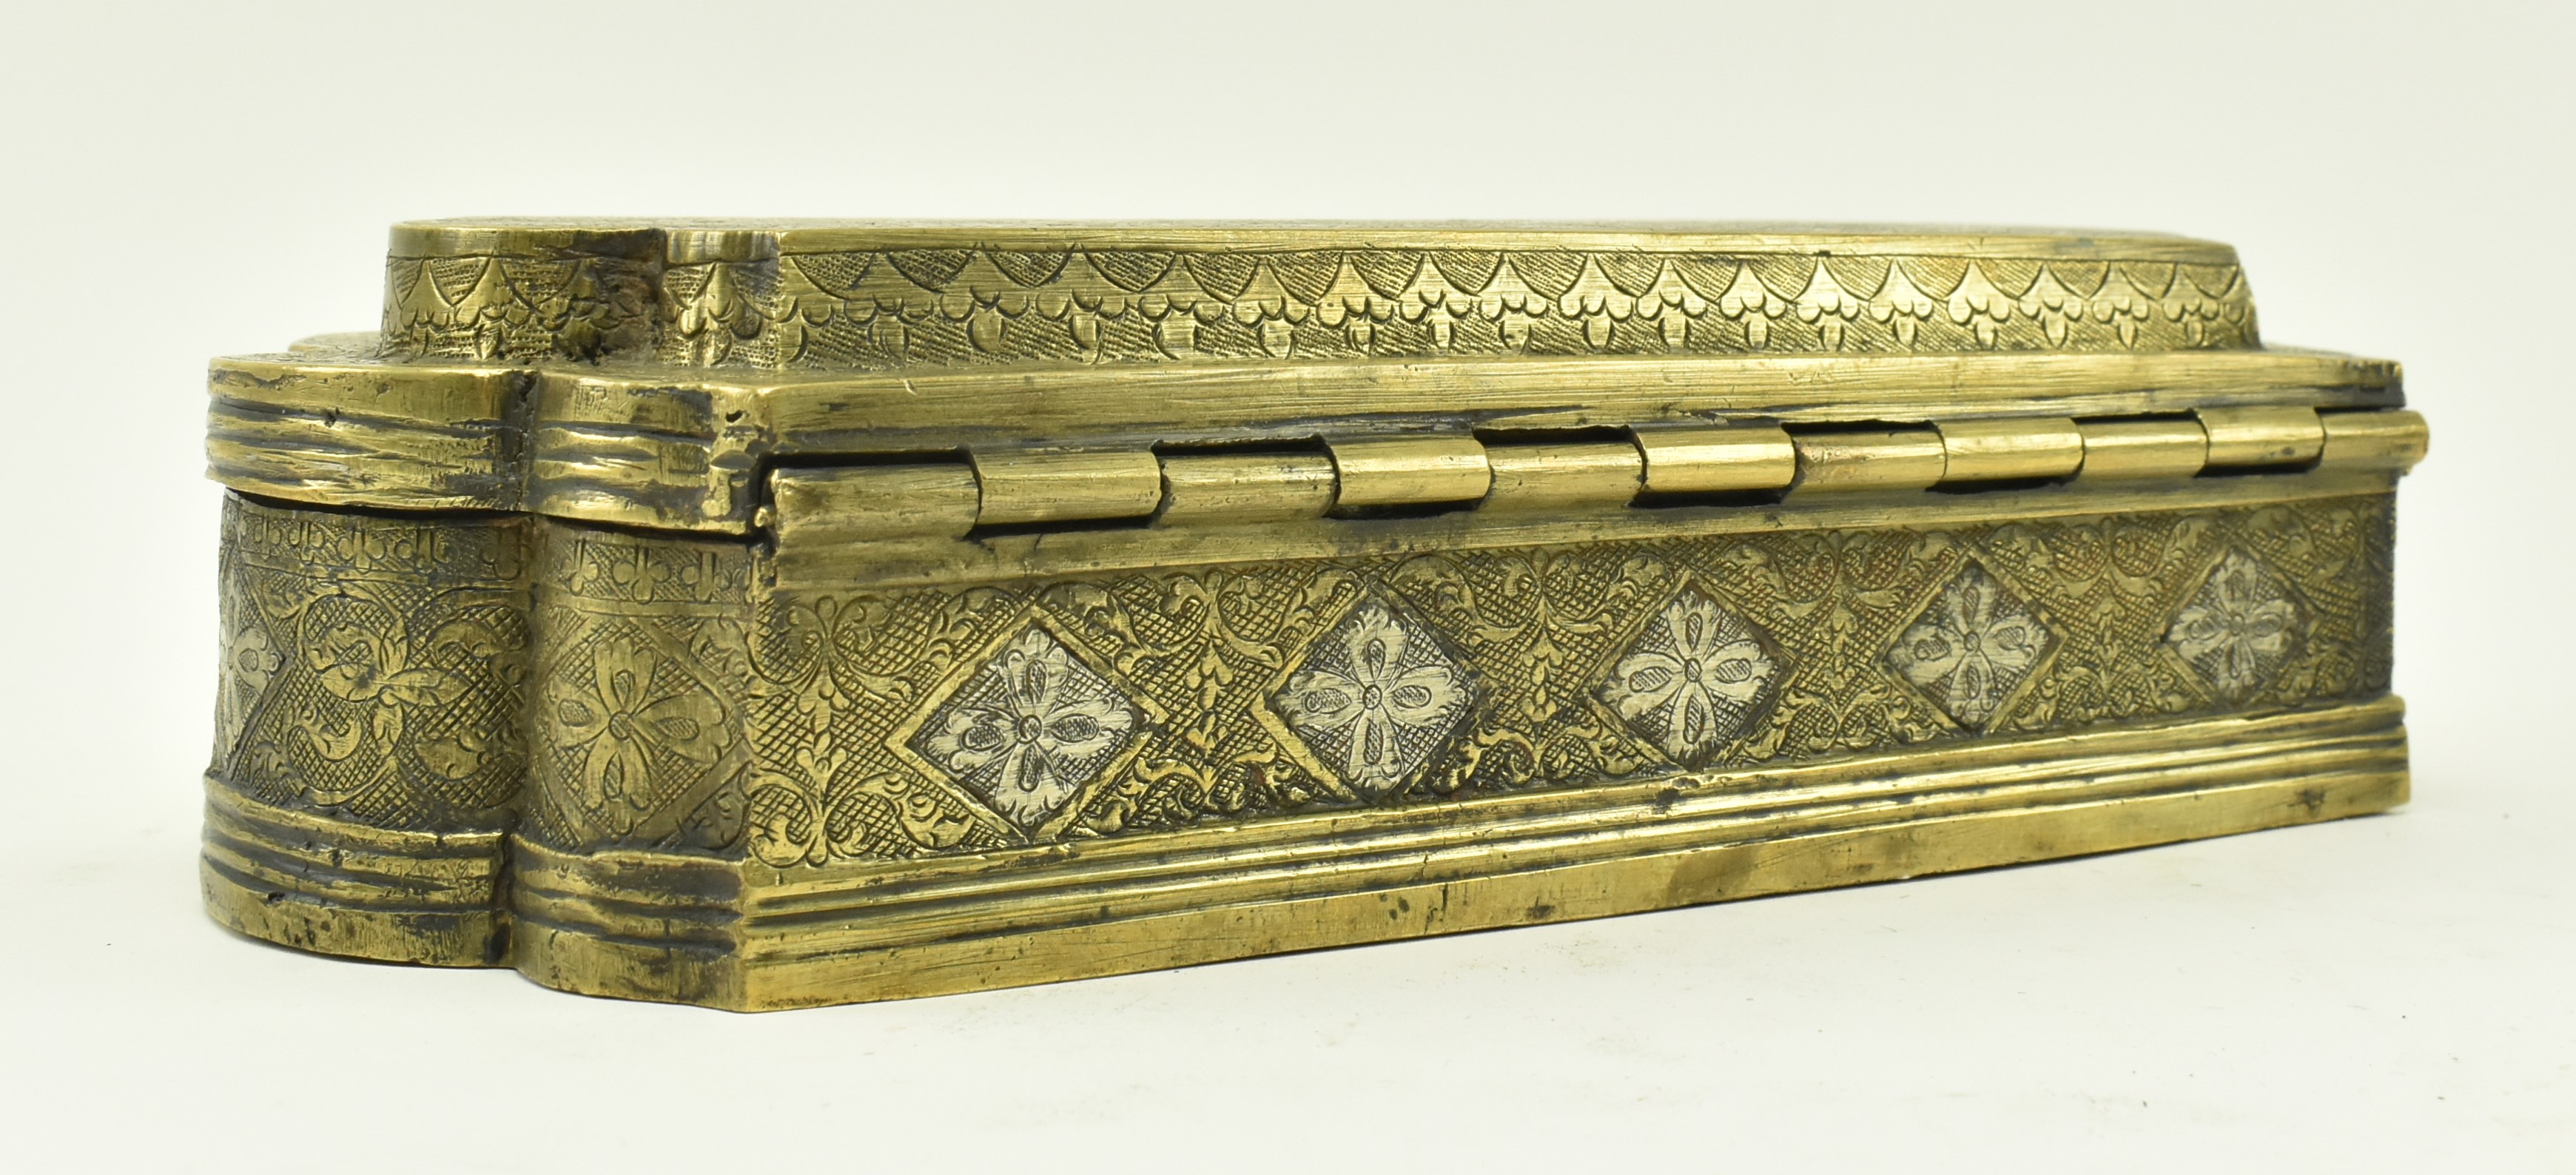 EARLY 20TH CENTURY ISLAMIC BRONZE BETEL BOX WITH SILVER INLAY - Image 6 of 6